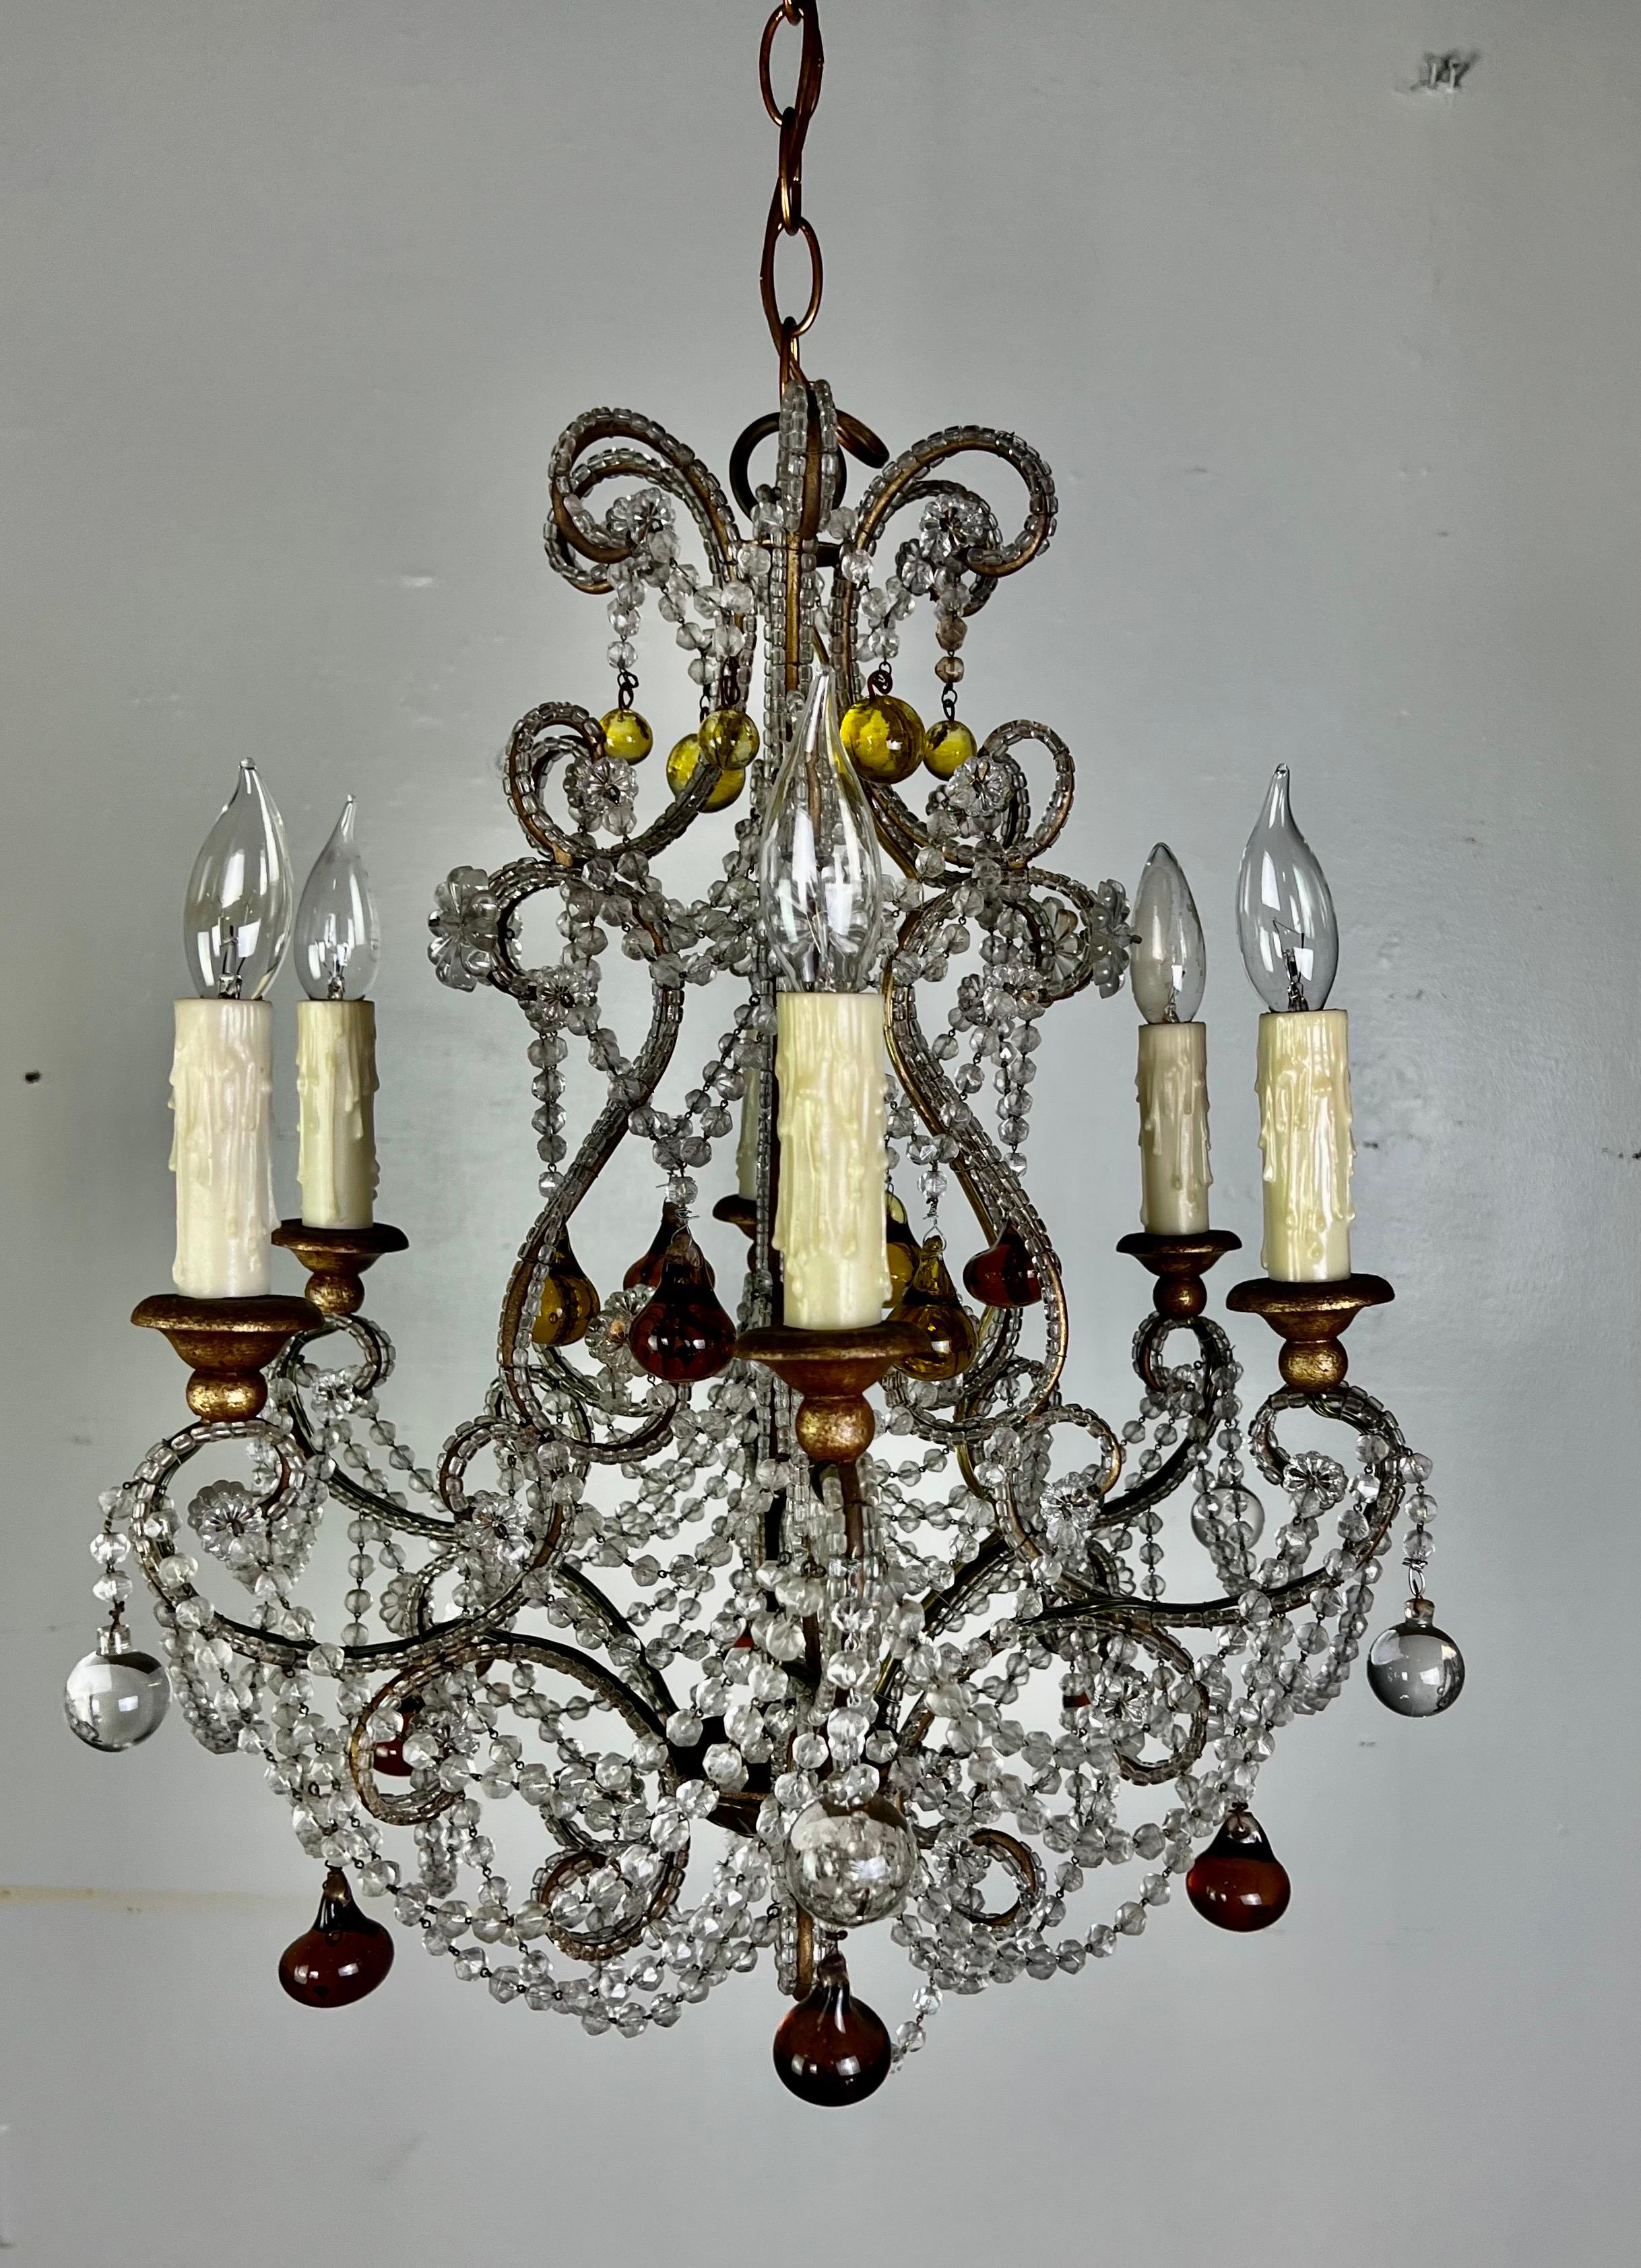 French six light crystal chandelier adorned with garlands of crystal beads, crystals, and amber/topaz hand blown glass drops. The fixture is newly rewired with drip wax candle covers. Chain & canopy included.